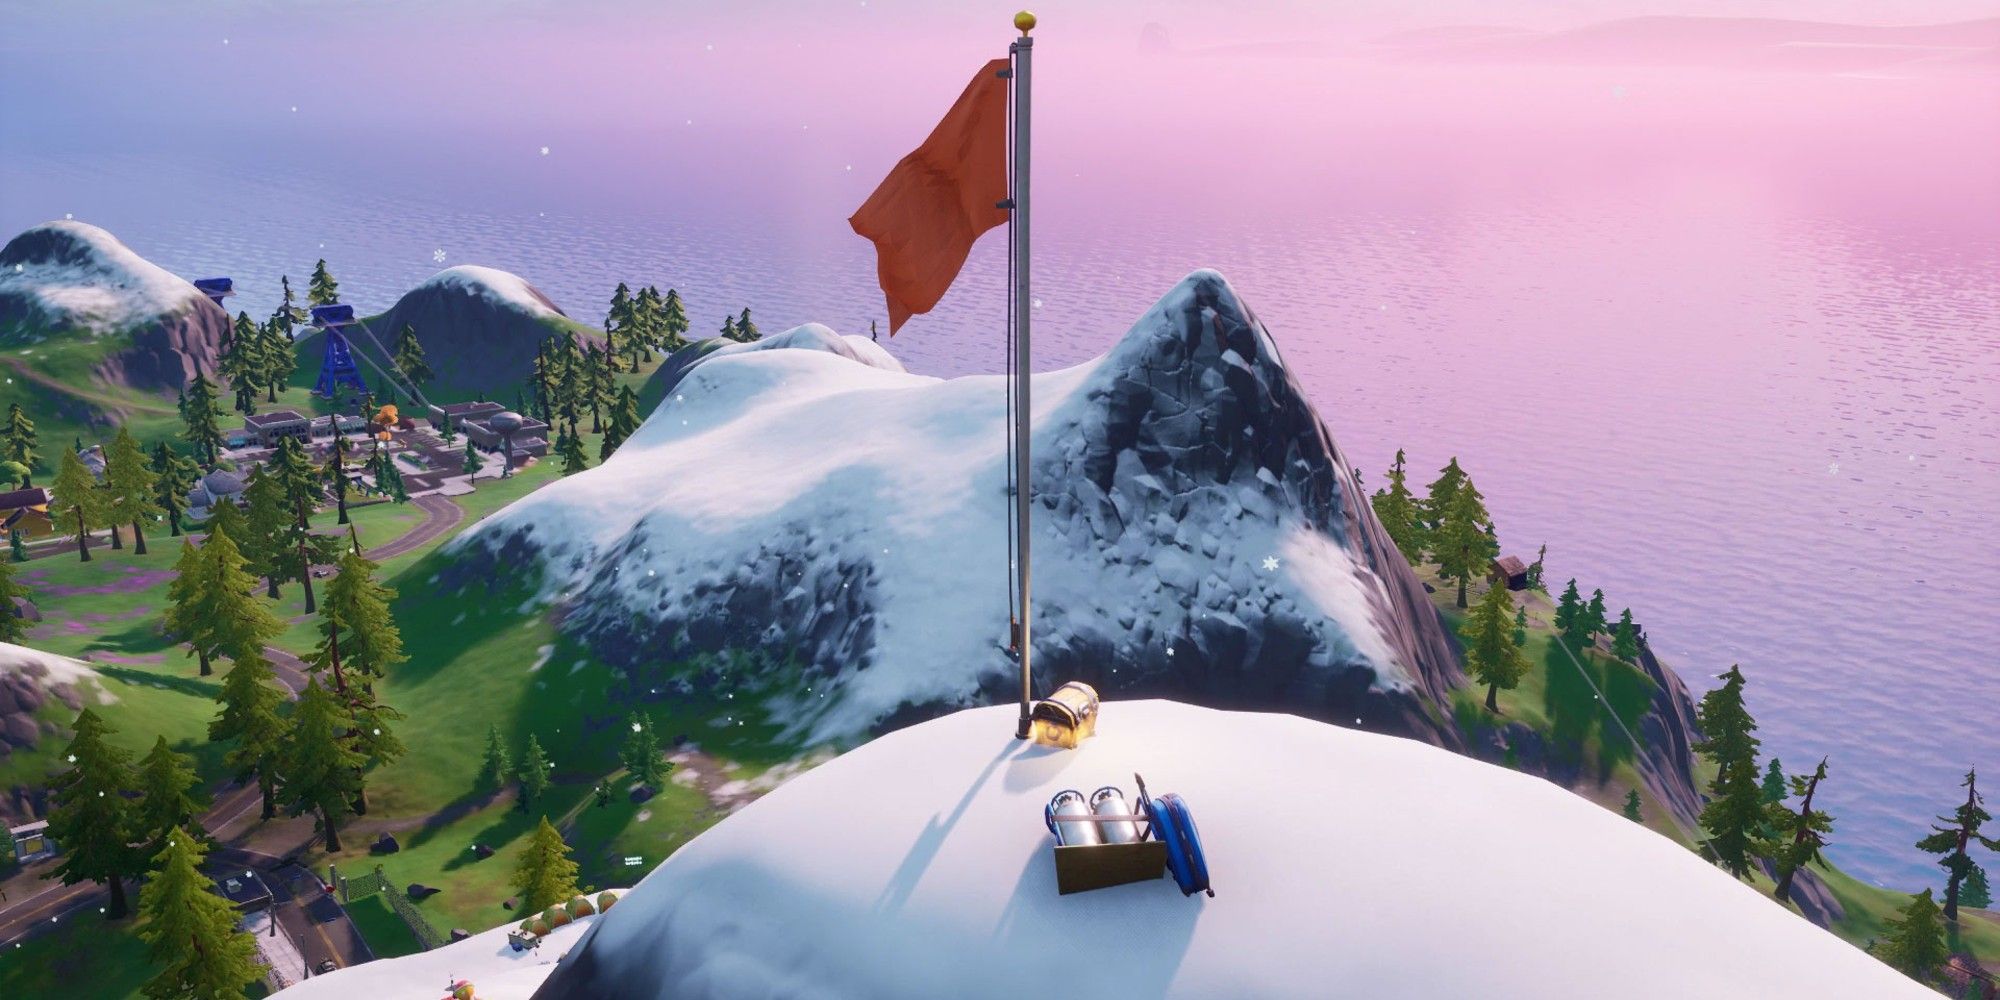 Mount Kay, the tallest point in Fortnite, with a flag